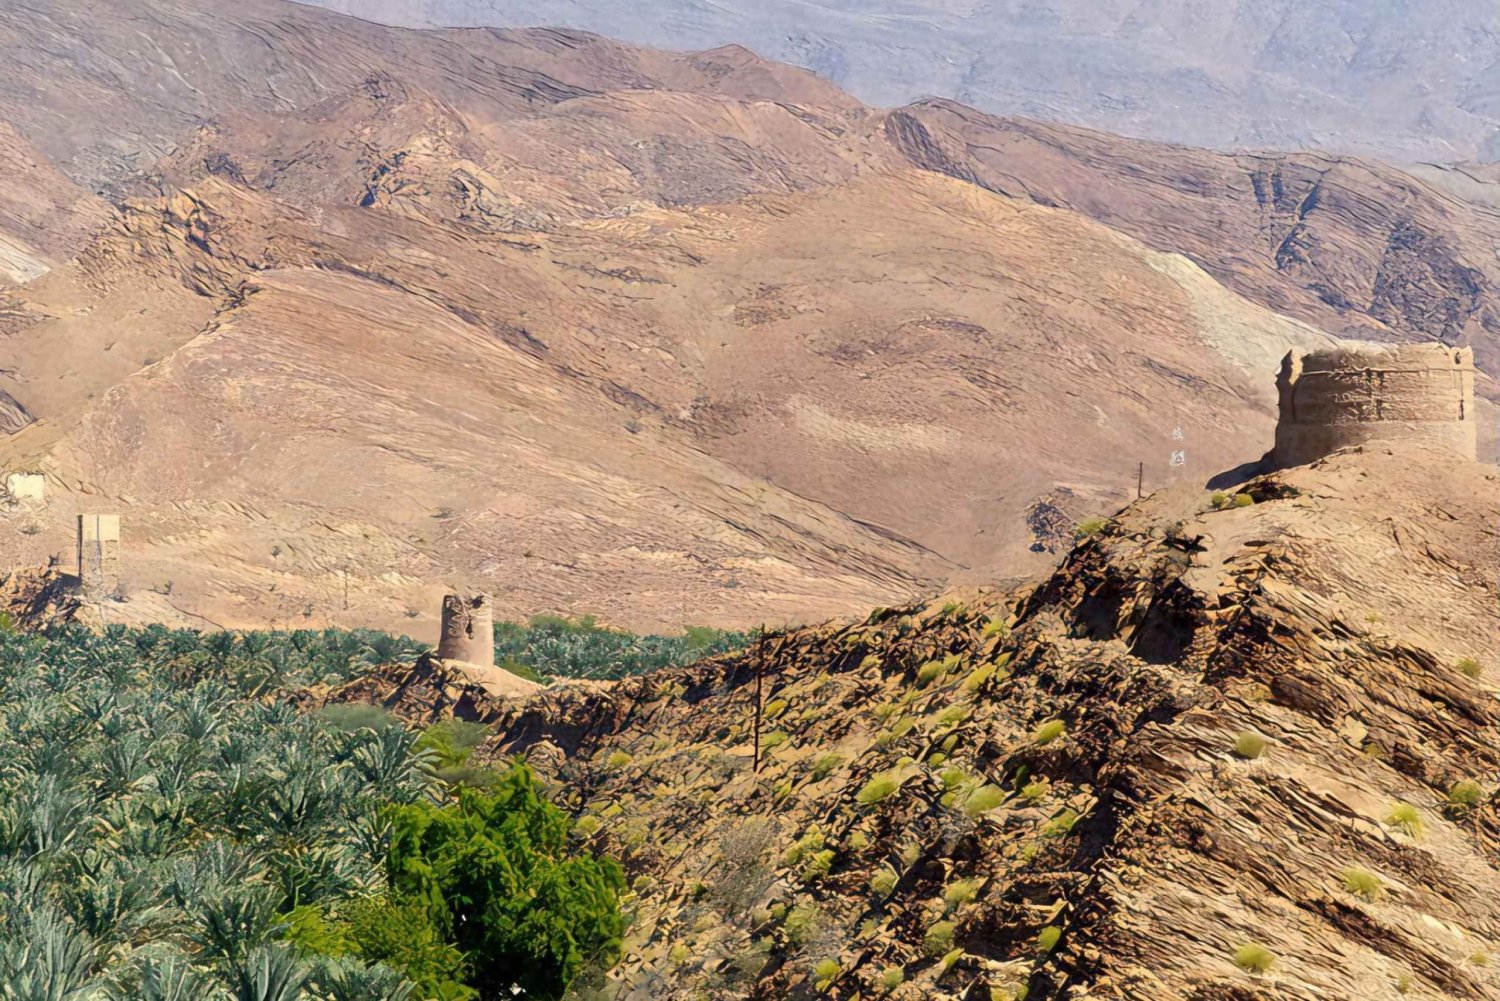 Jebel Akhdar (Day Trip) - ' Cool & Green ' - 8 Hours approx